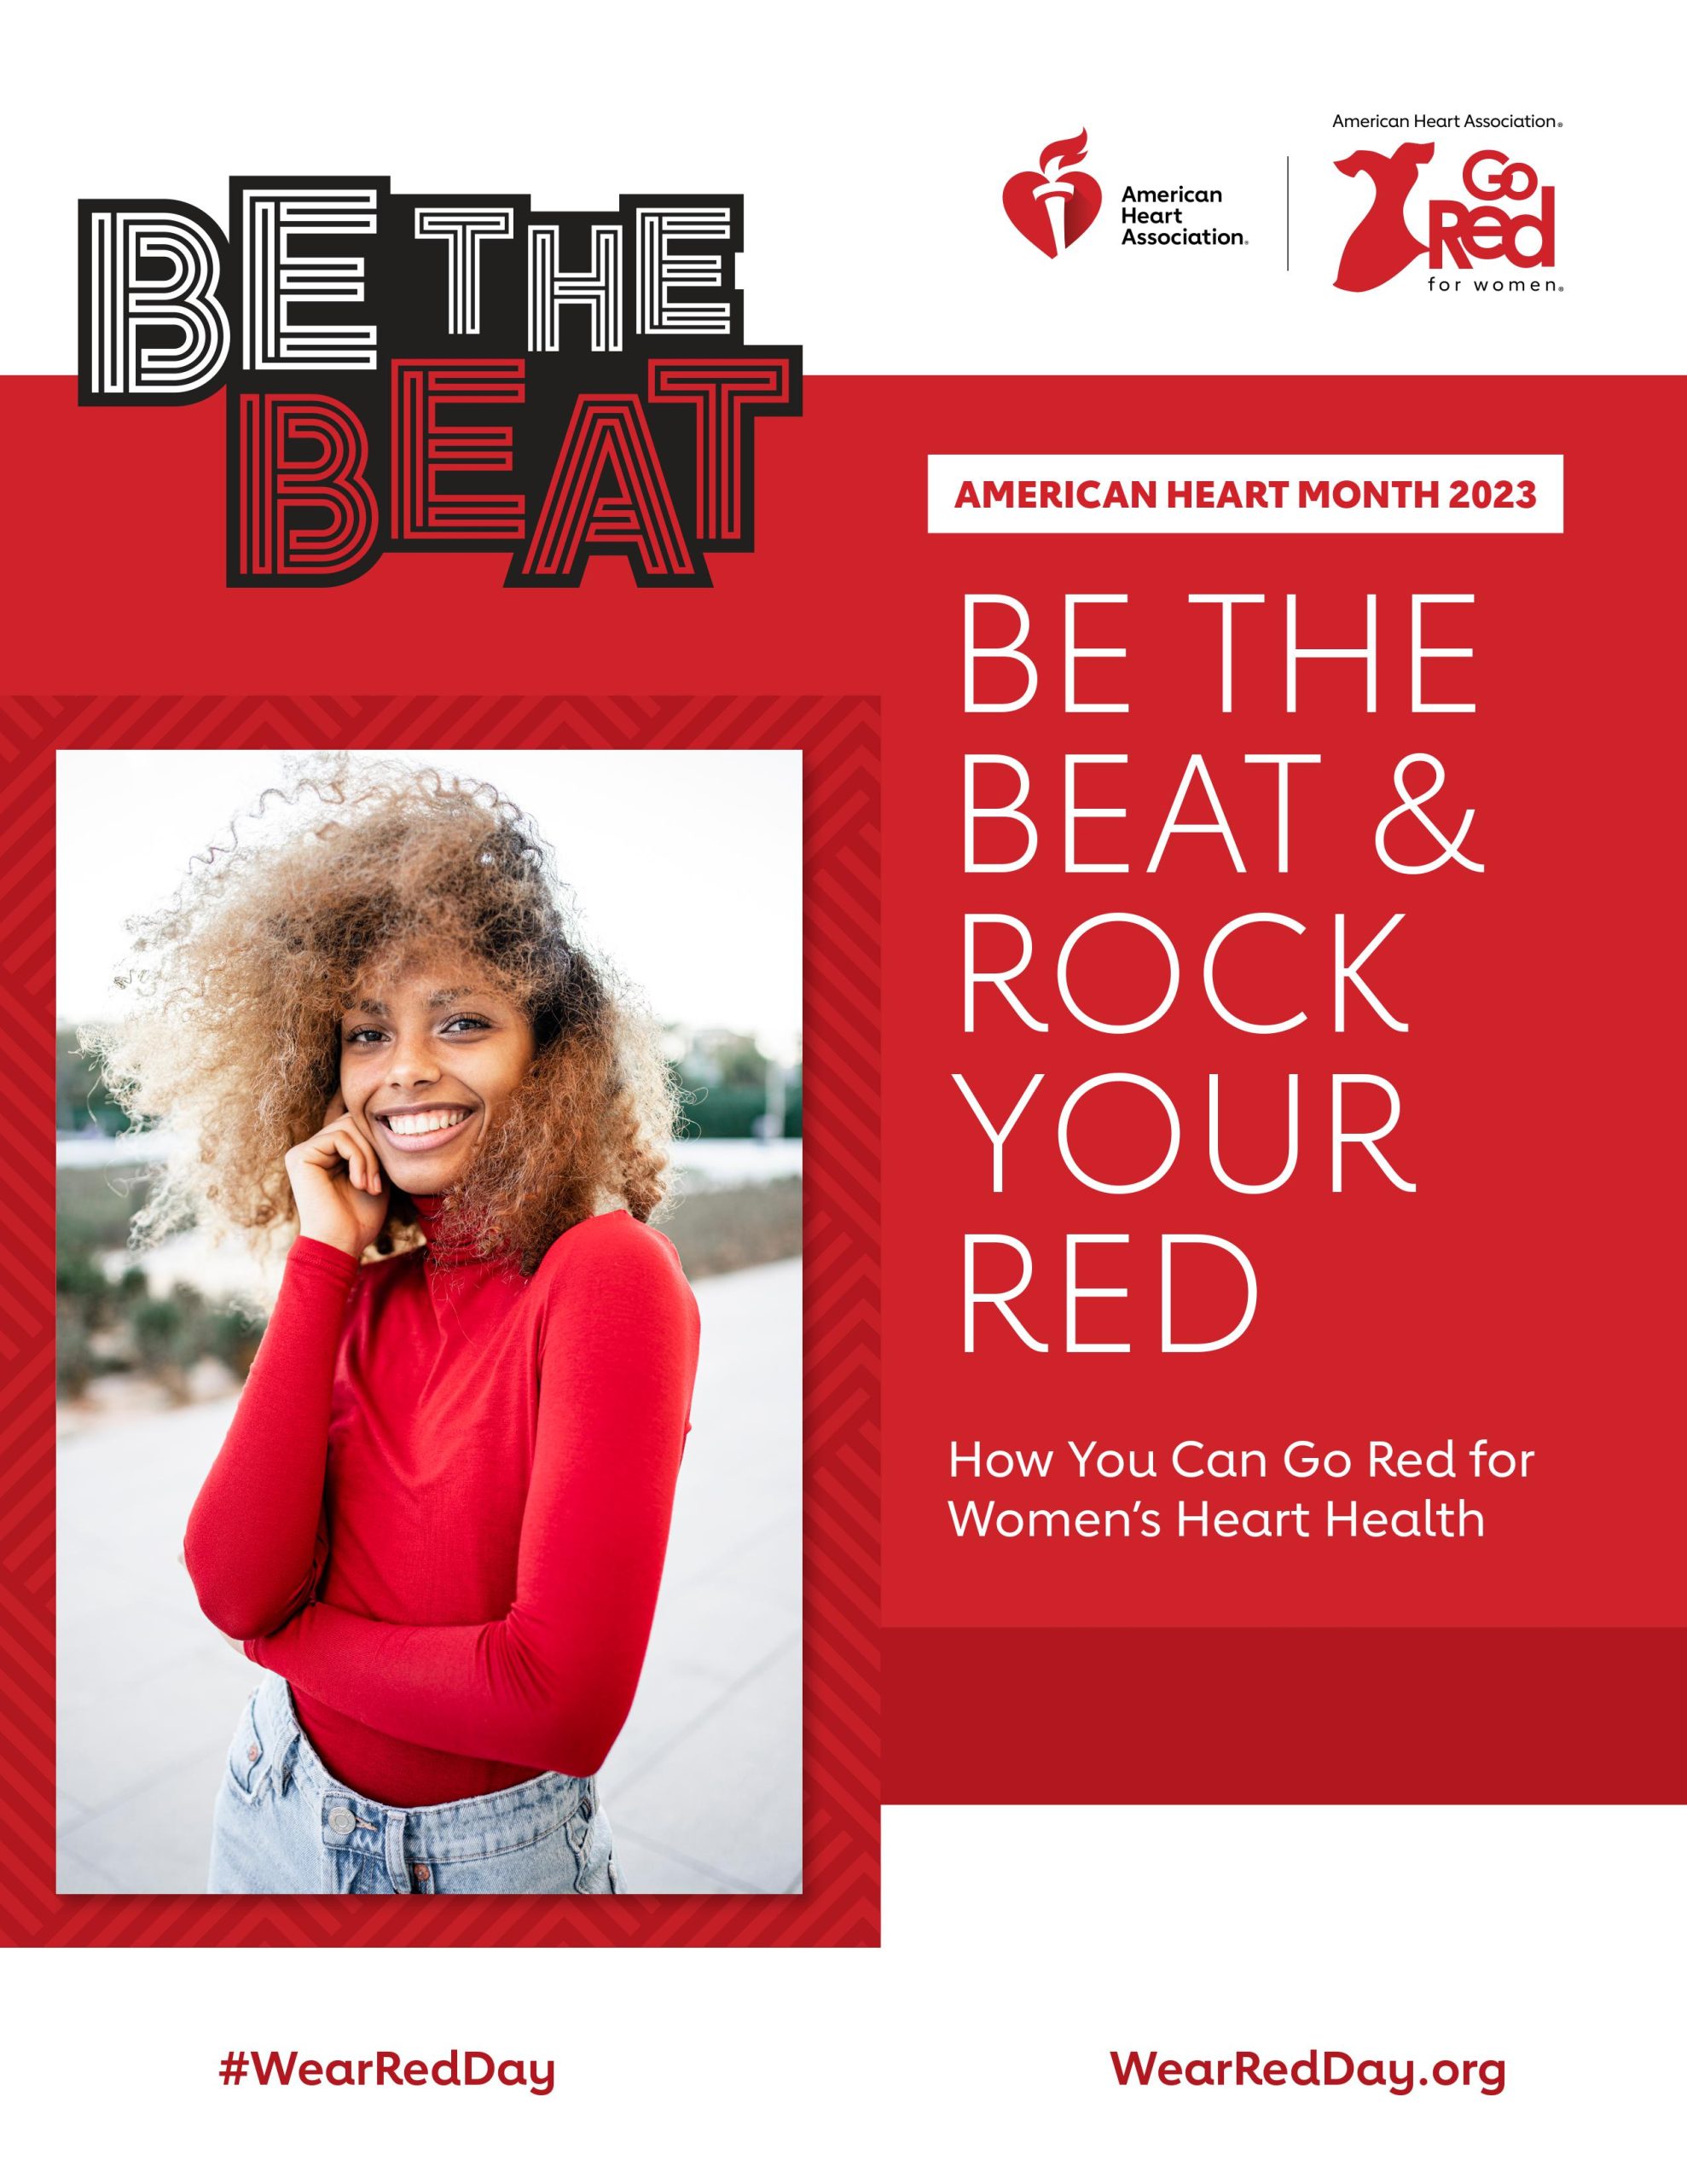 National Wear Red for Women Day